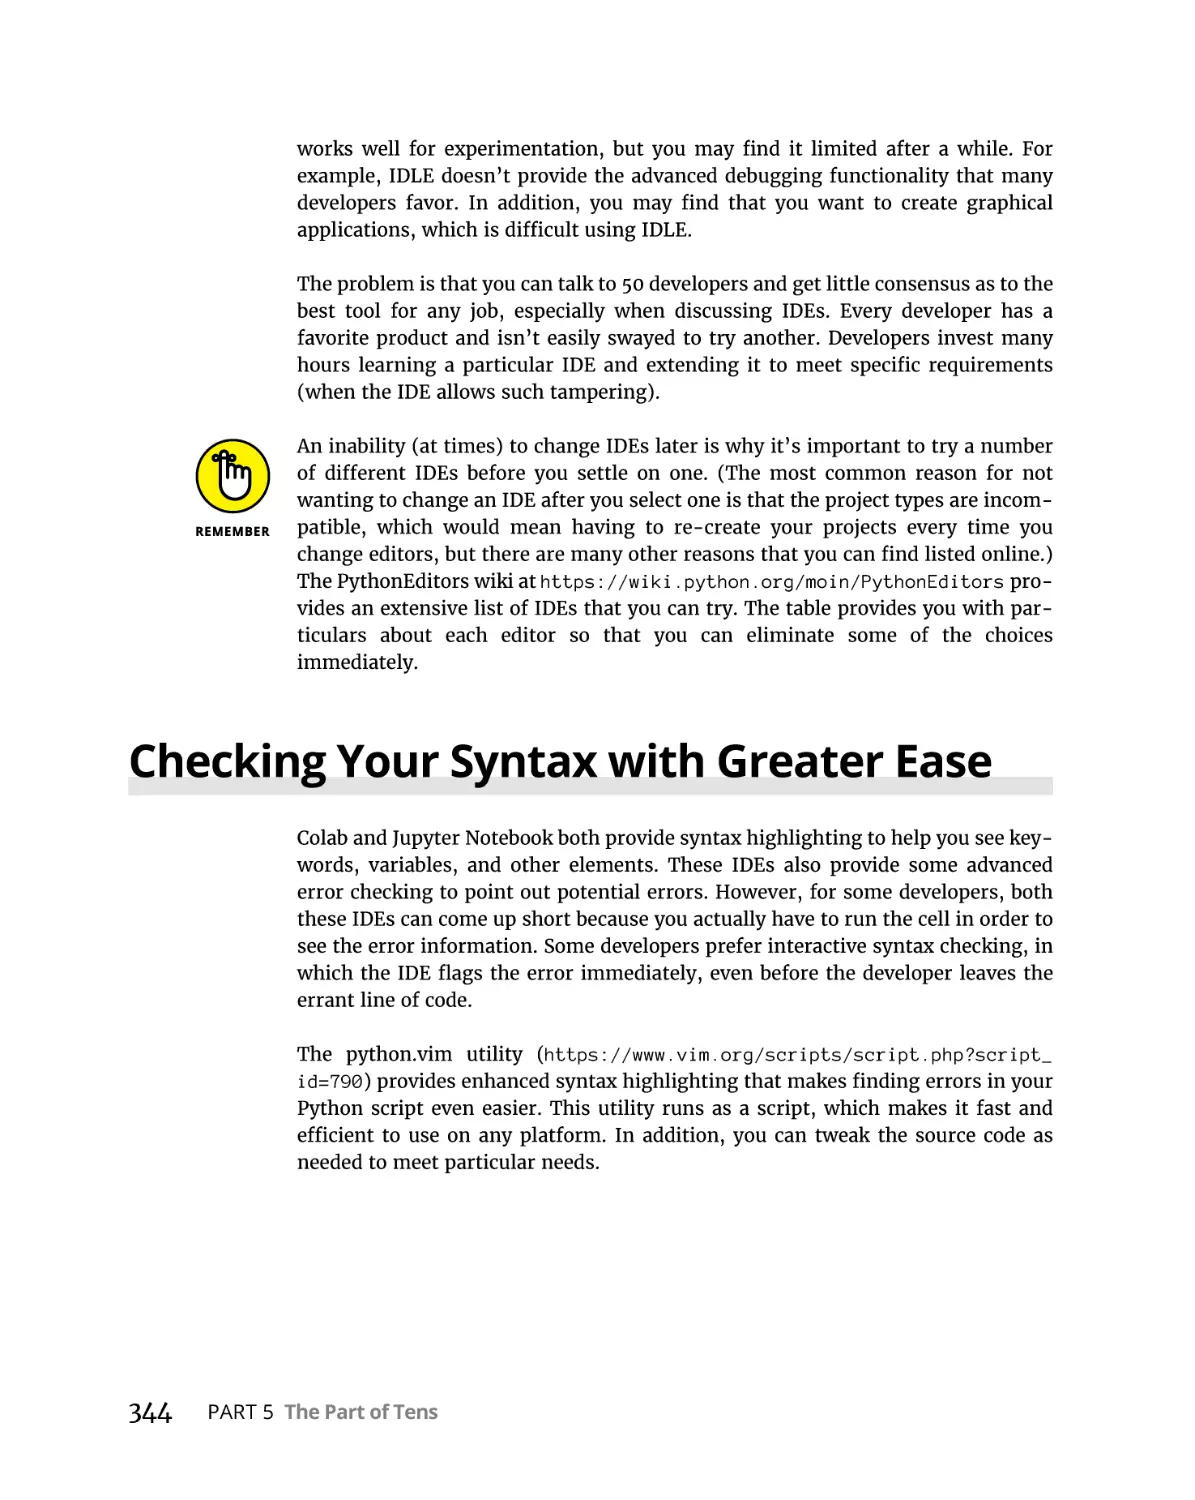 Checking Your Syntax with Greater Ease